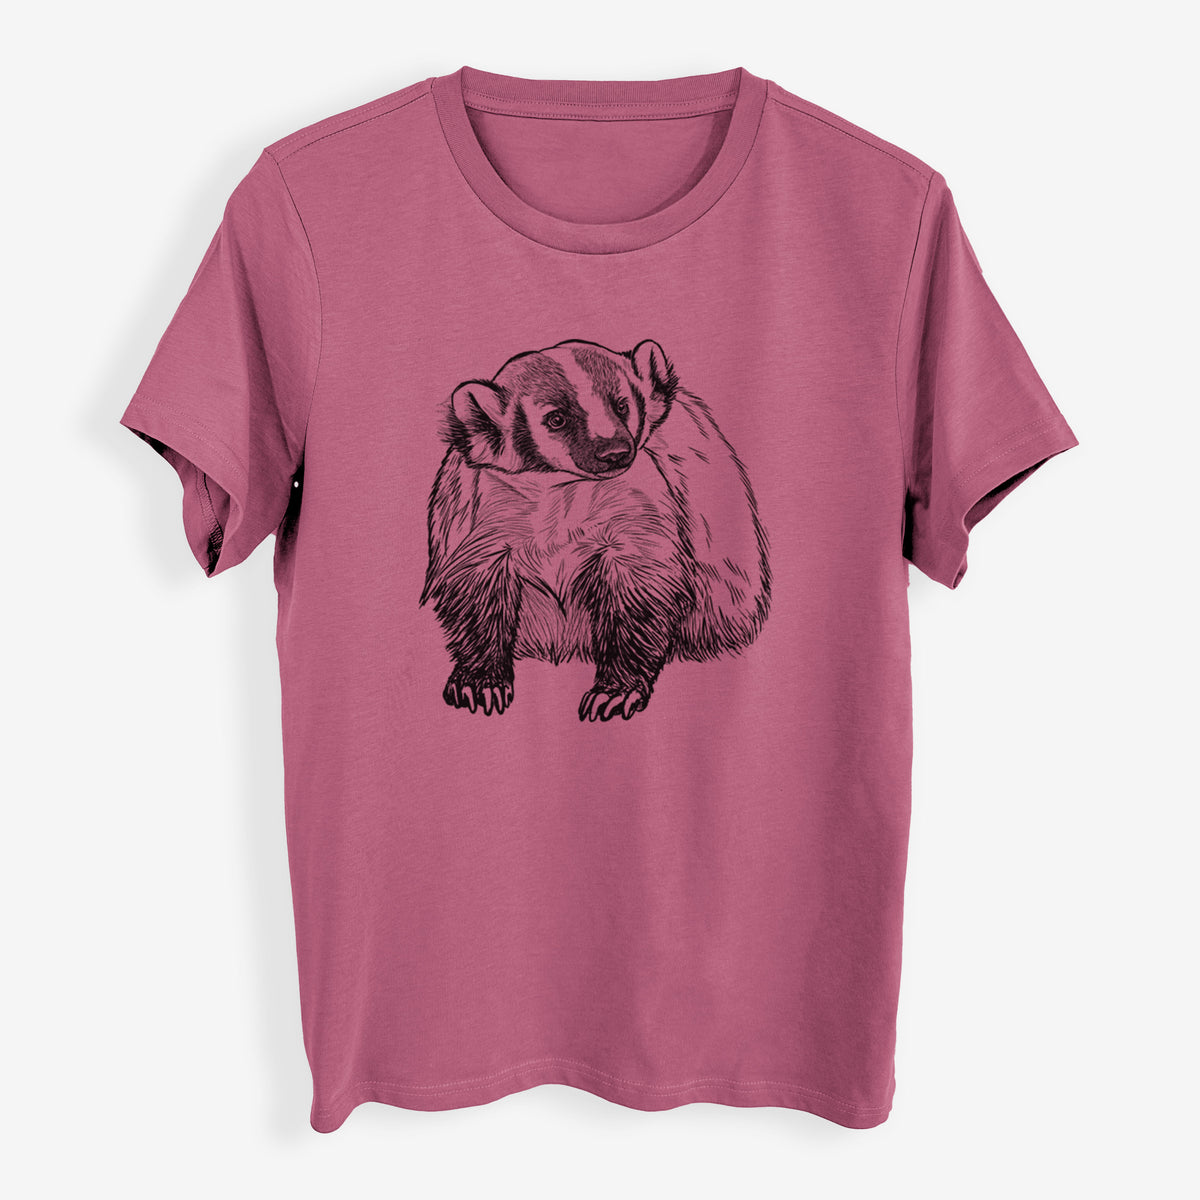 American Badger - Taxidea taxus - Womens Everyday Maple Tee